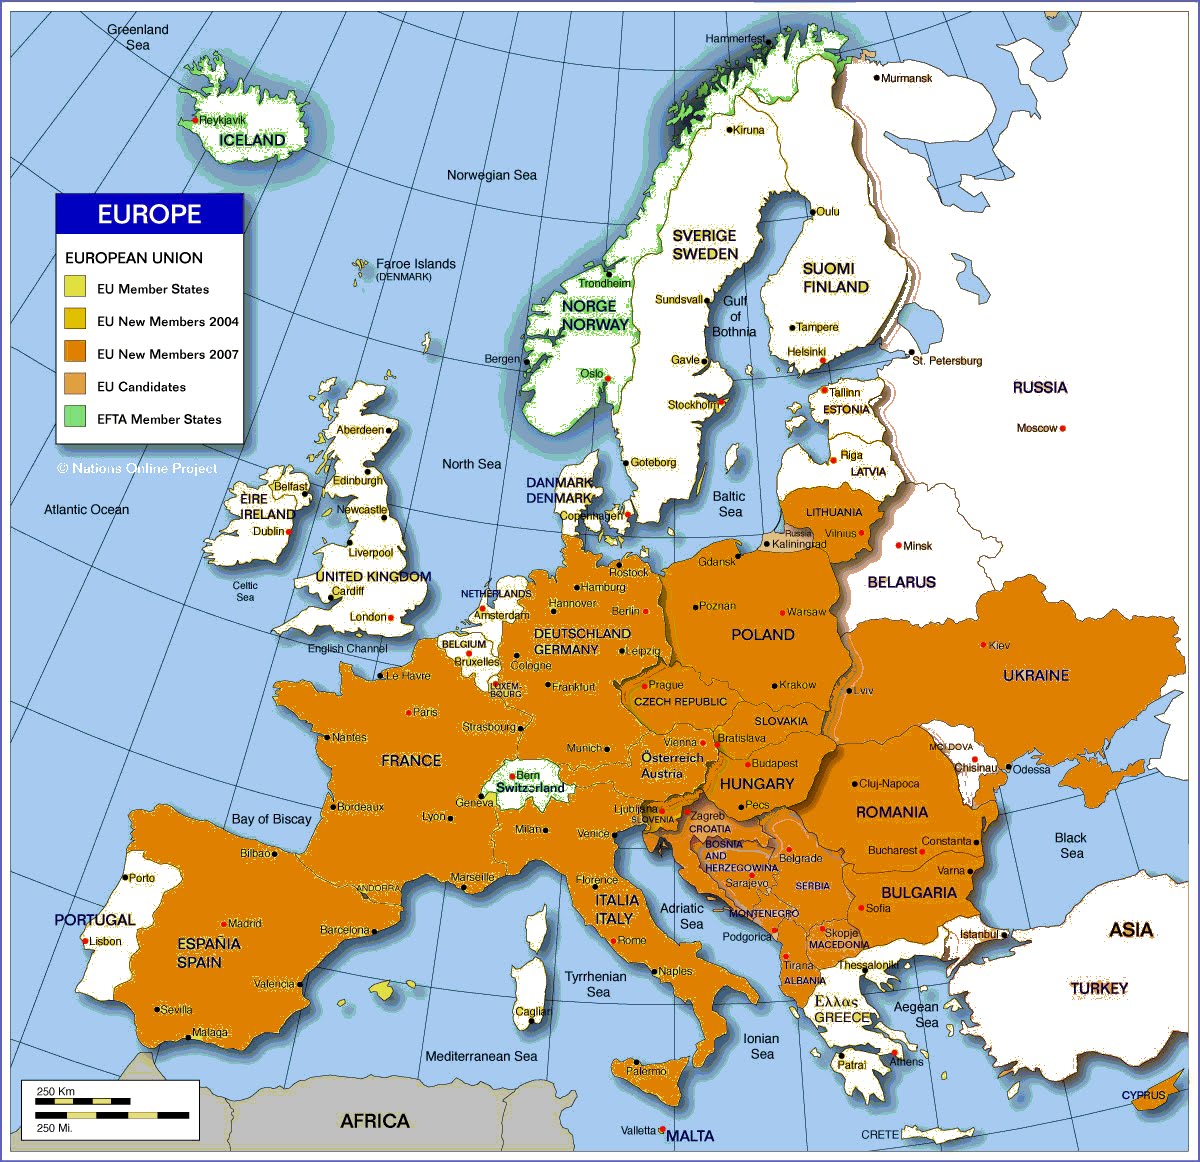 Our travels in Europe and beyond: europe map